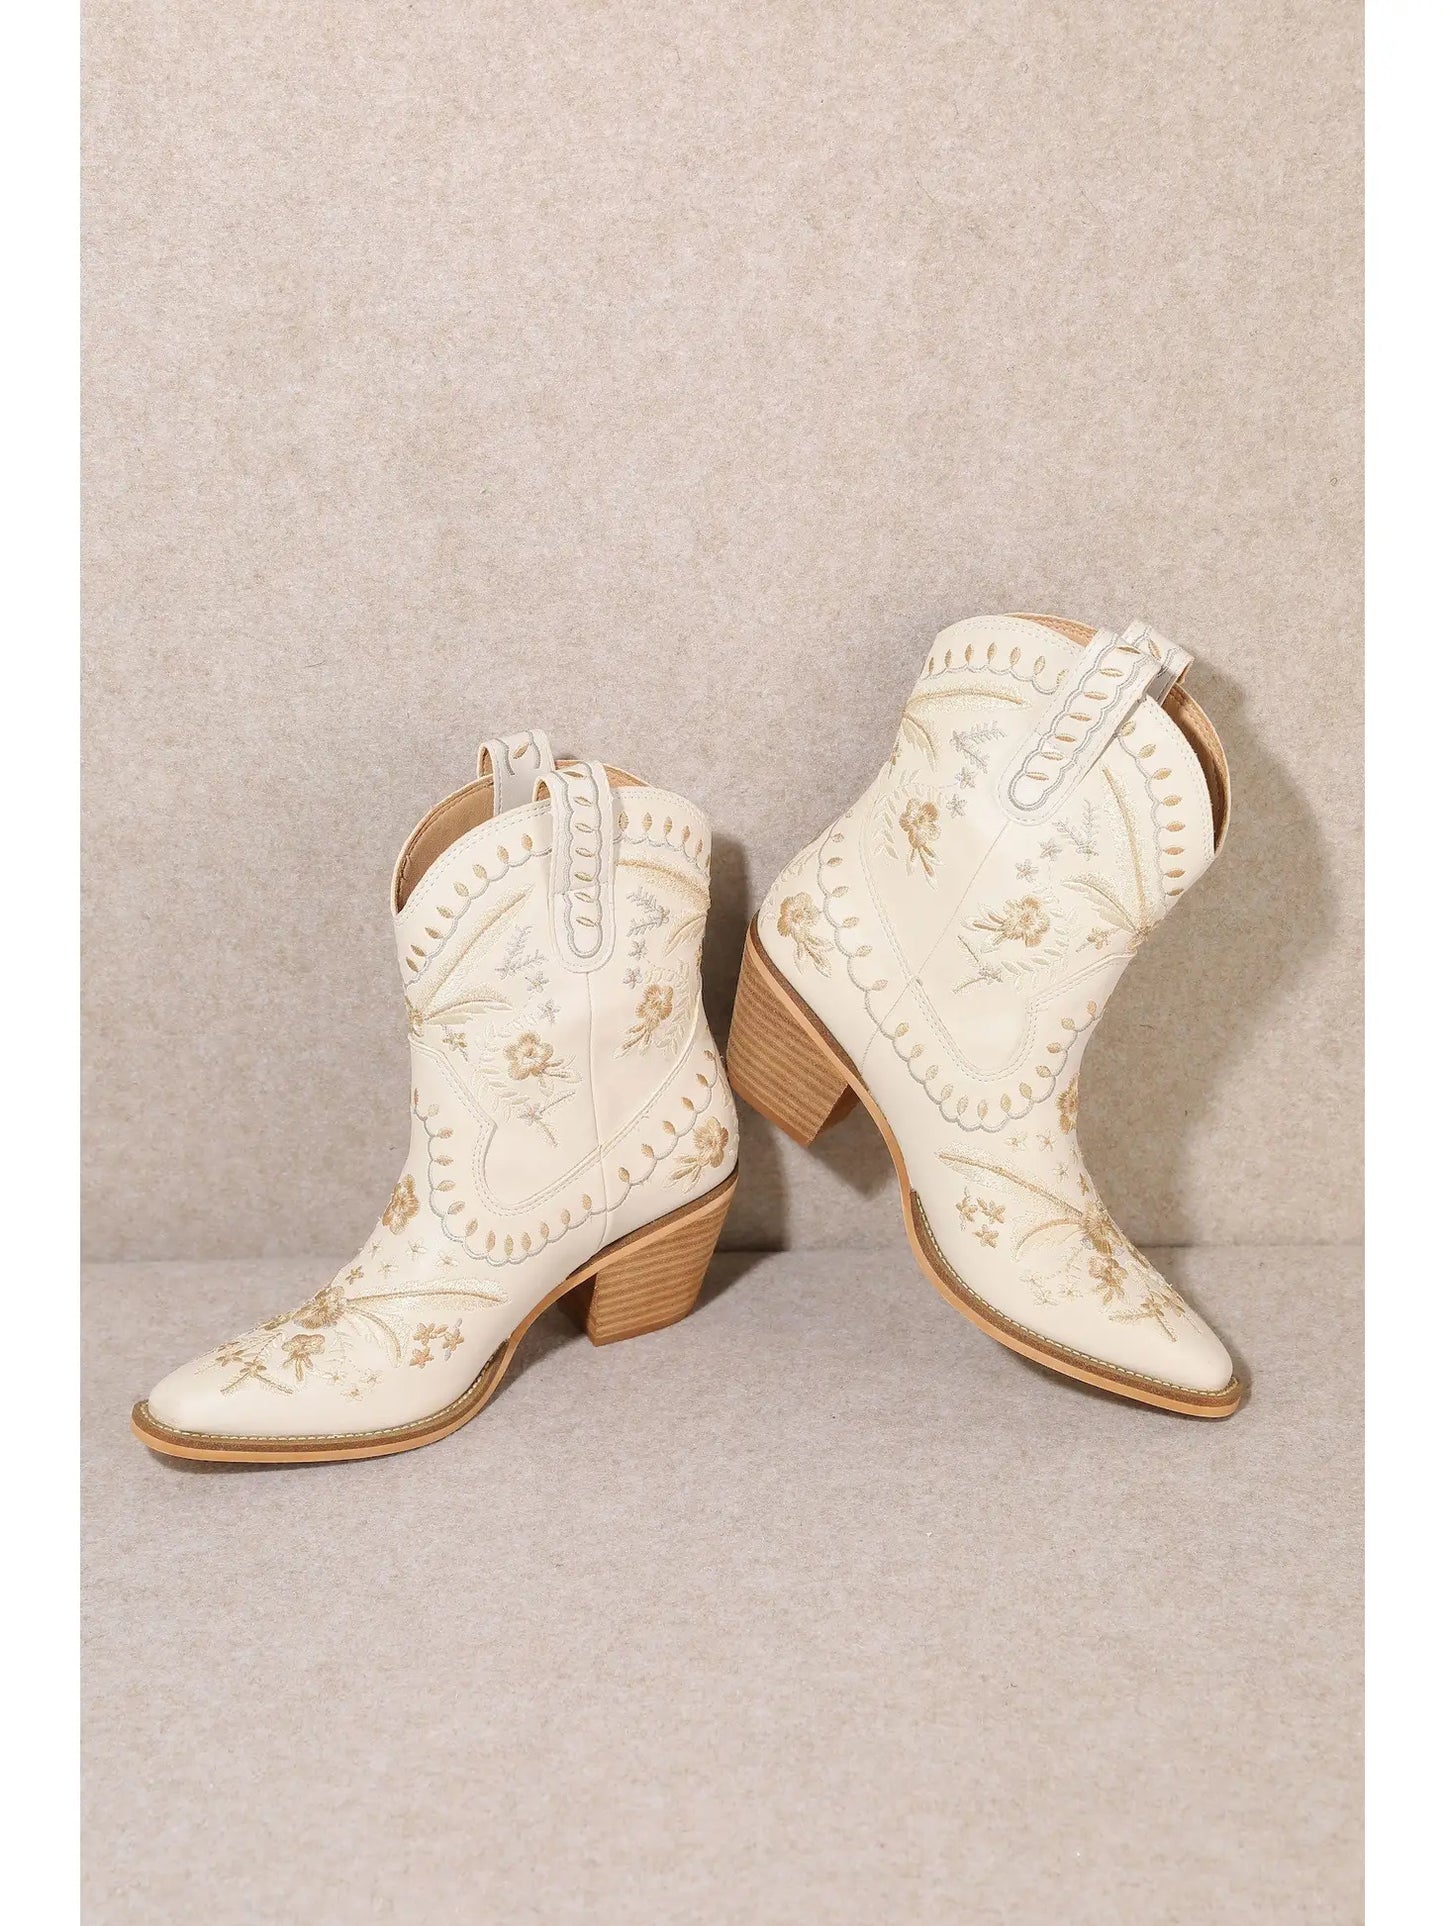 Corral Point Toe Floral Boots